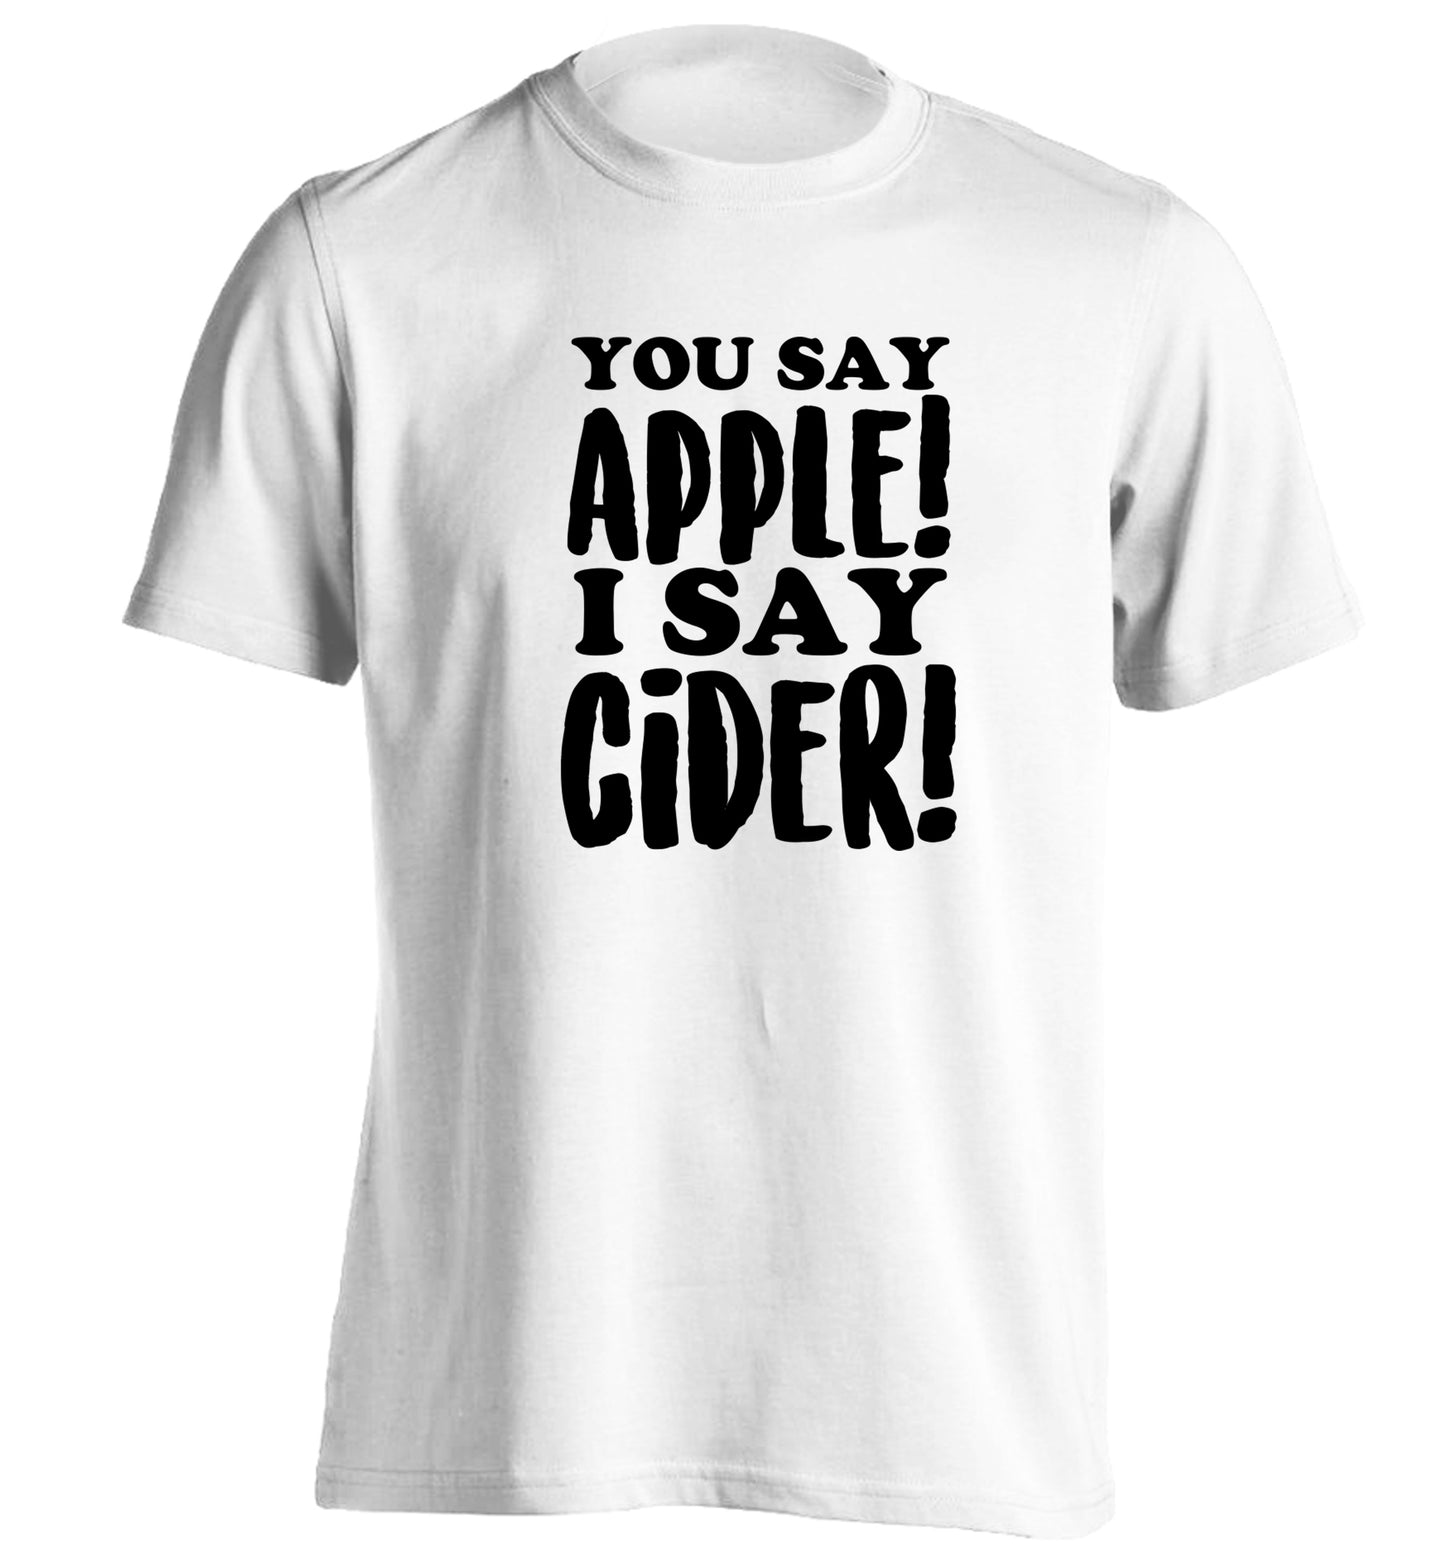 You say apple I say cider! adults unisex white Tshirt 2XL